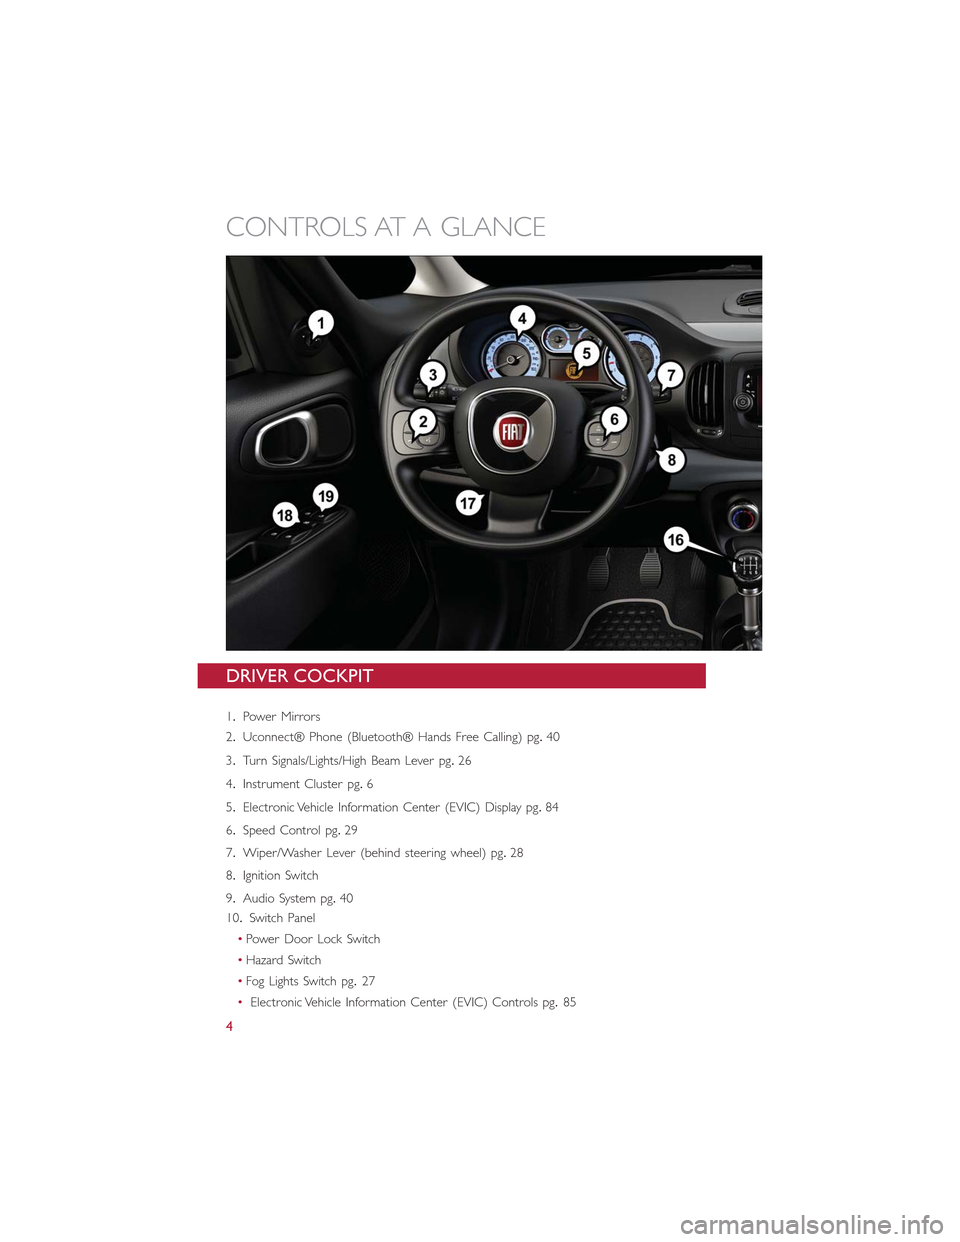 FIAT 500L 2015 2.G User Guide DRIVER COCKPIT
1.Power Mirrors
2.Uconnect® Phone (Bluetooth® Hands Free Calling) pg.40
3.Turn Signals/Lights/High Beam Lever pg.26
4.Instrument Cluster pg.6
5.Electronic Vehicle Information Center (